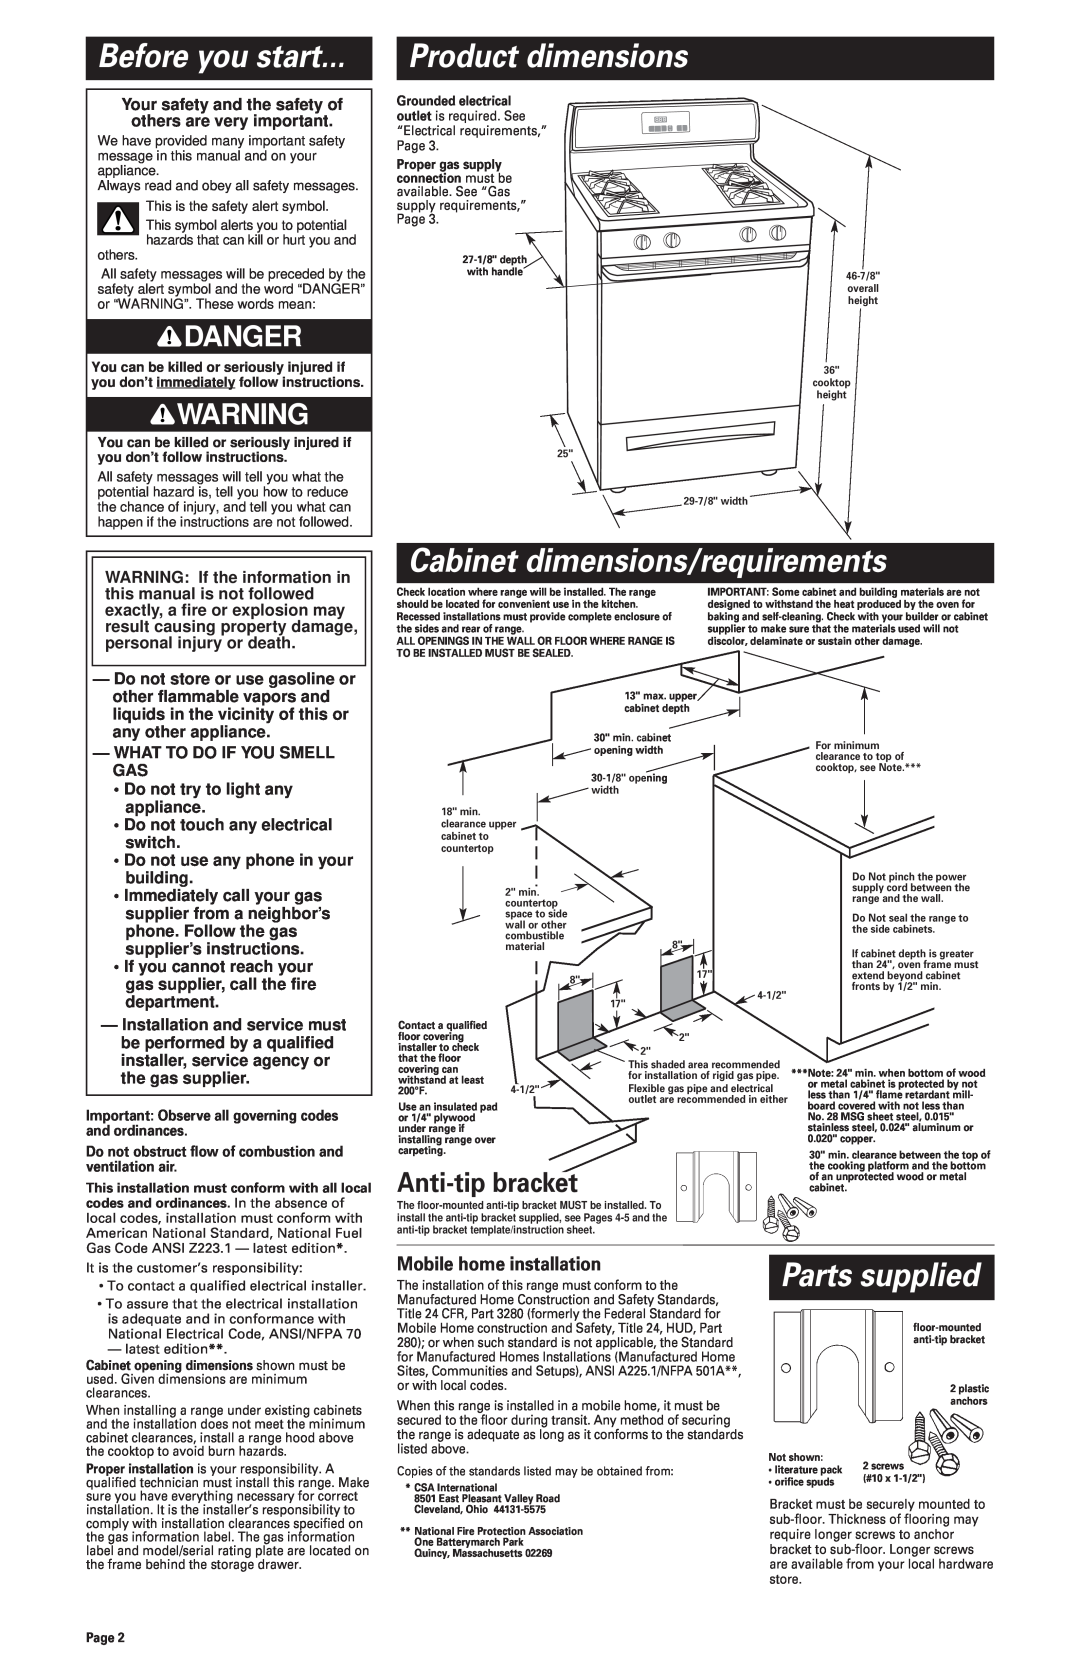 Whirlpool 8523782 Product dimensions, Cabinet dimensions/requirements, Parts supplied, Anti-tip bracket, Before you start 